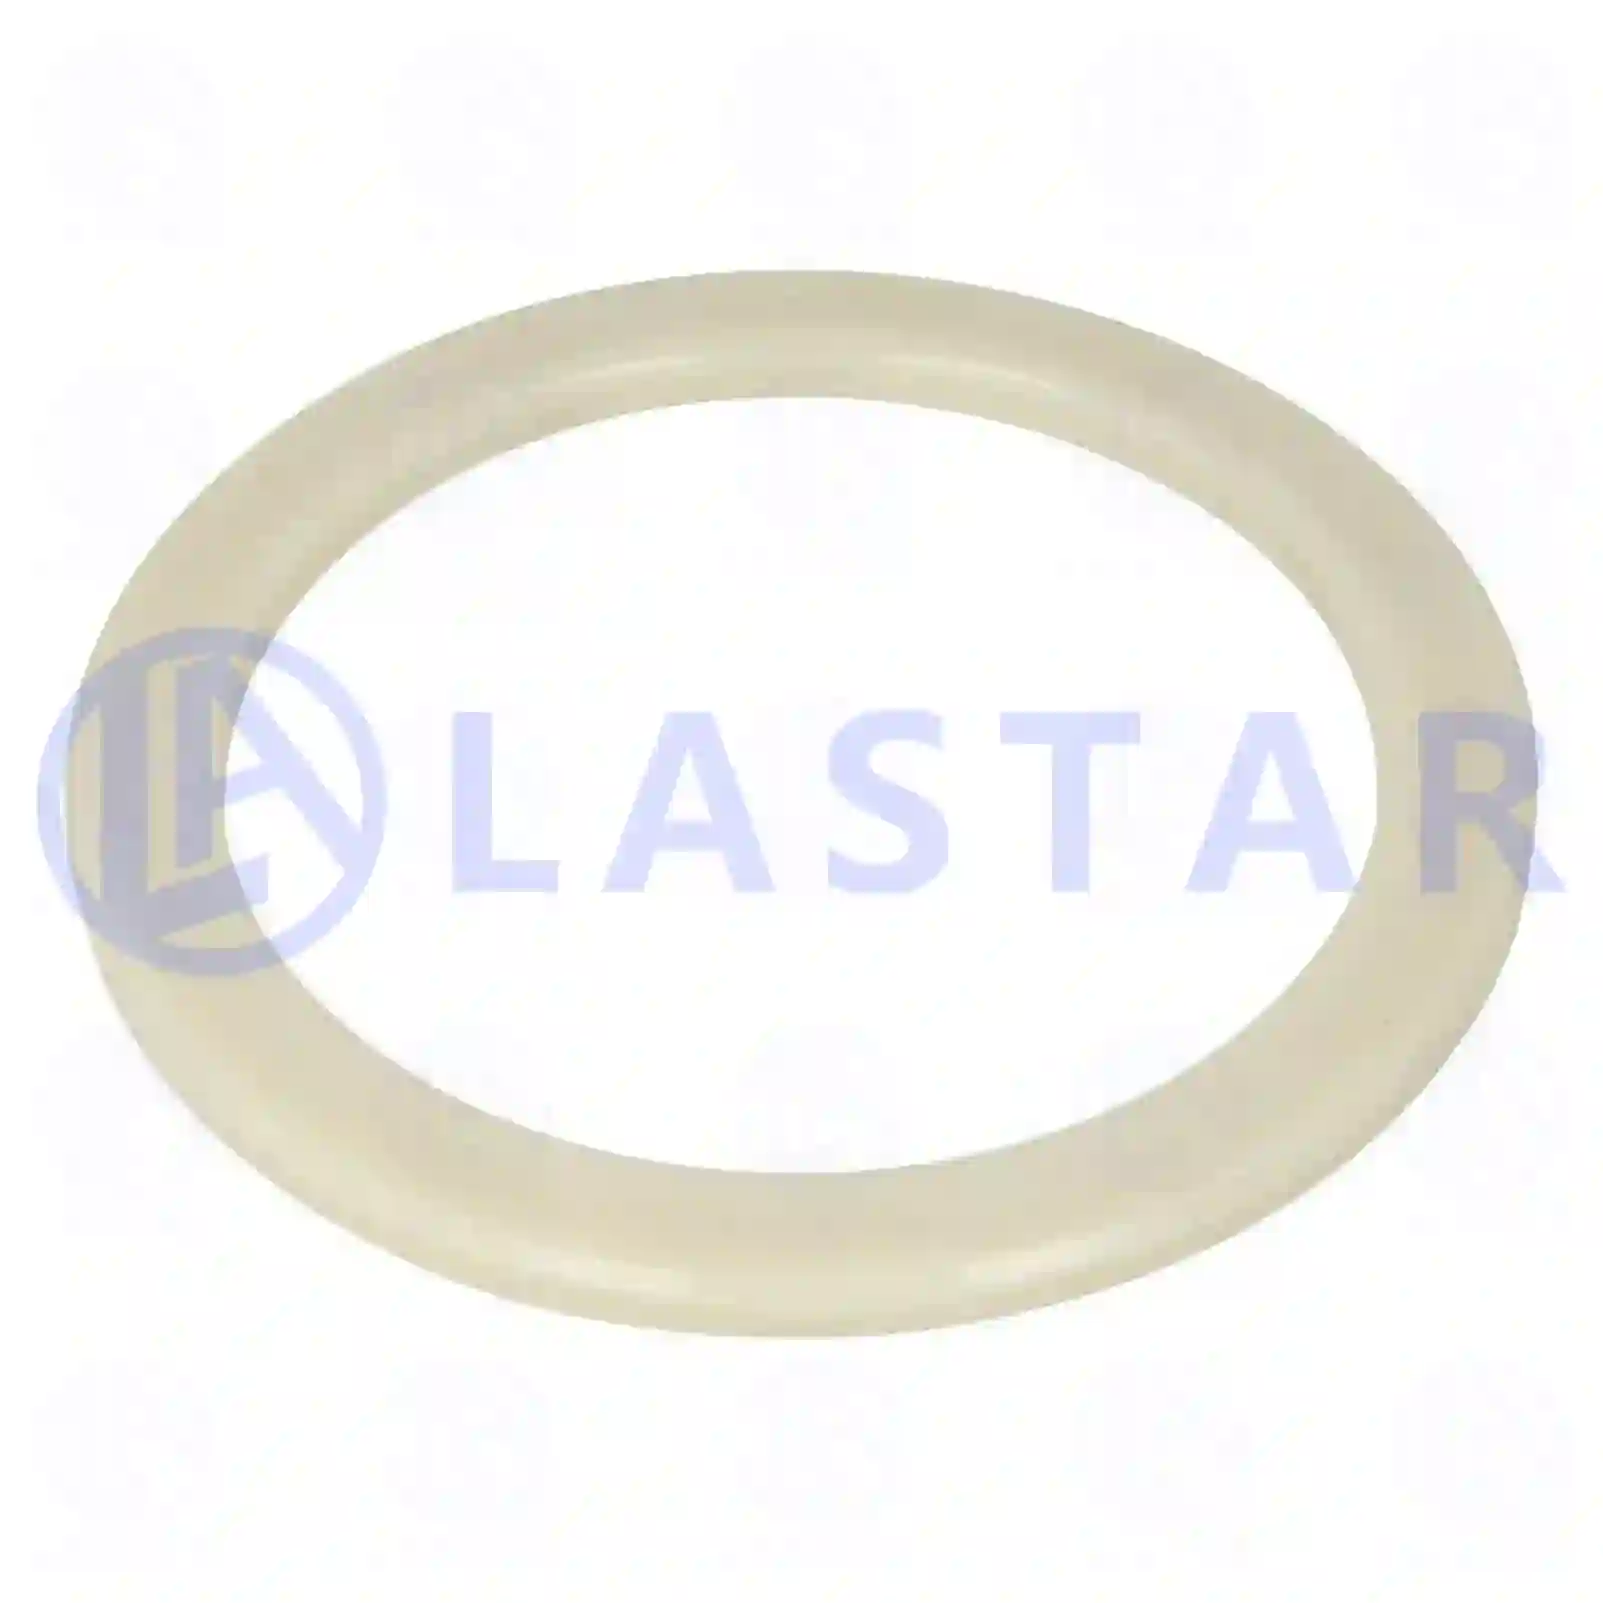 Distance ring, 77728179, 9473250050, 9473250050, ||  77728179 Lastar Spare Part | Truck Spare Parts, Auotomotive Spare Parts Distance ring, 77728179, 9473250050, 9473250050, ||  77728179 Lastar Spare Part | Truck Spare Parts, Auotomotive Spare Parts